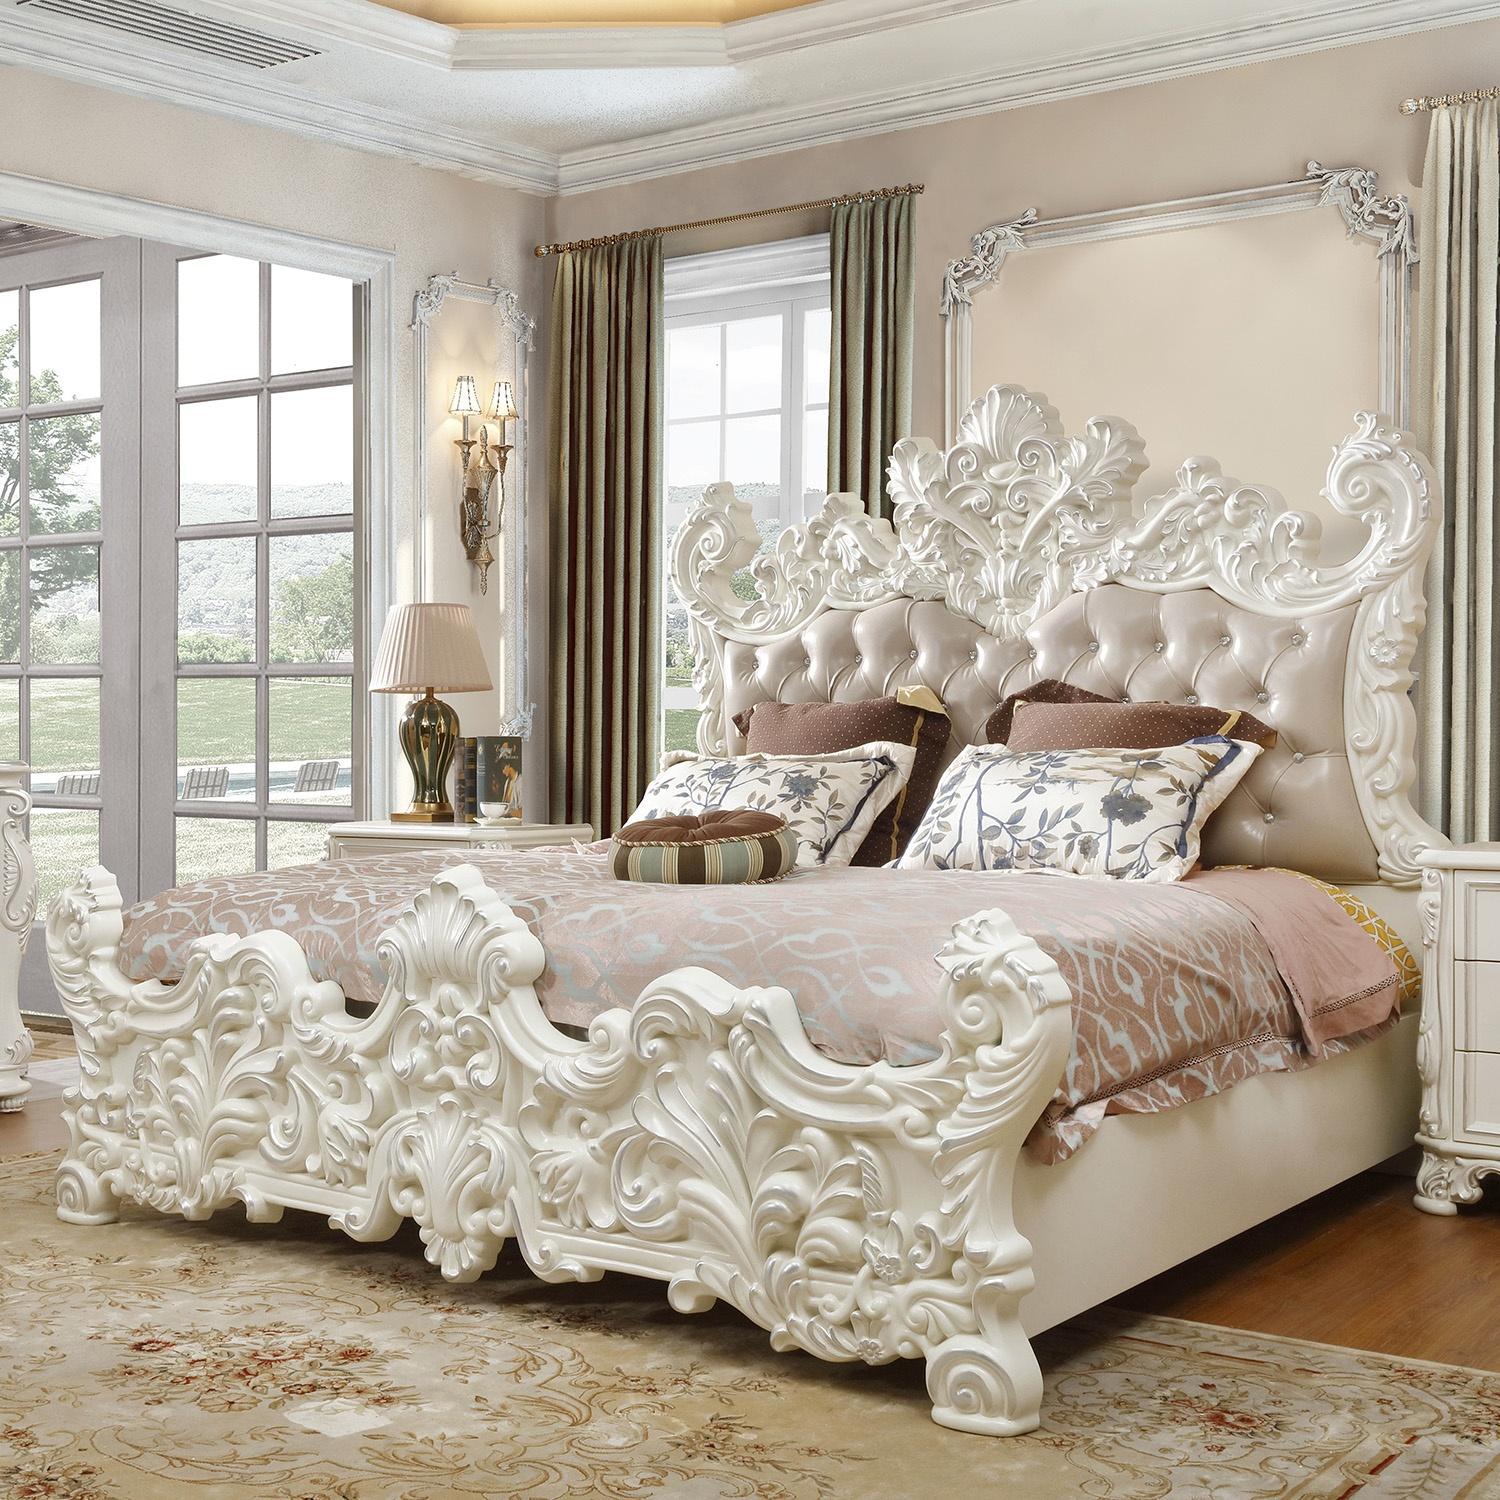 Traditional Panel Bed HD-8008I HD-8008I-EK in Silver, Ivory Leather